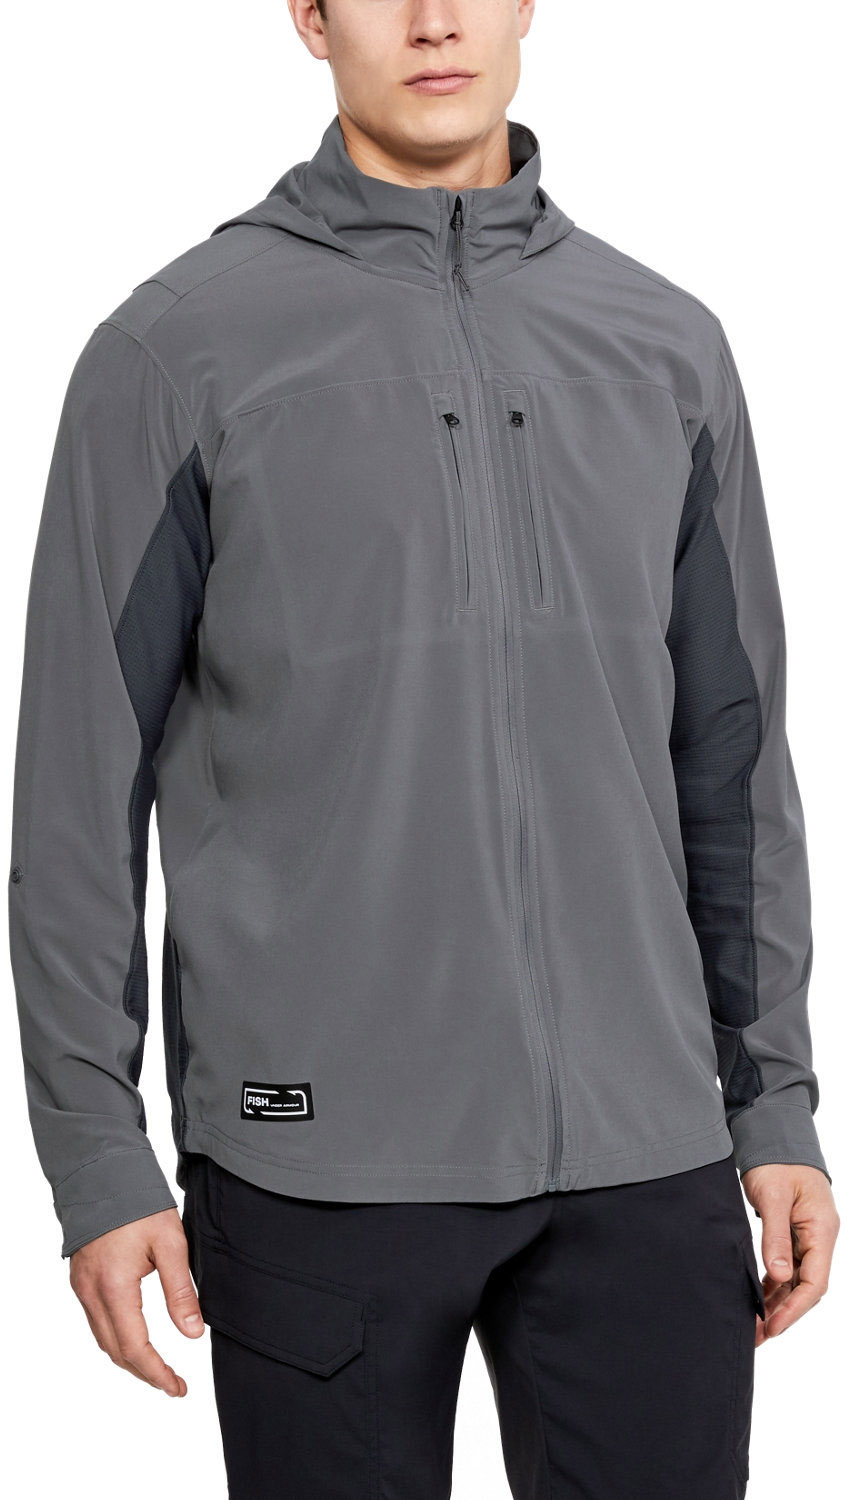 4 Colors Under Armour Men's Backwater Long Sleeve 